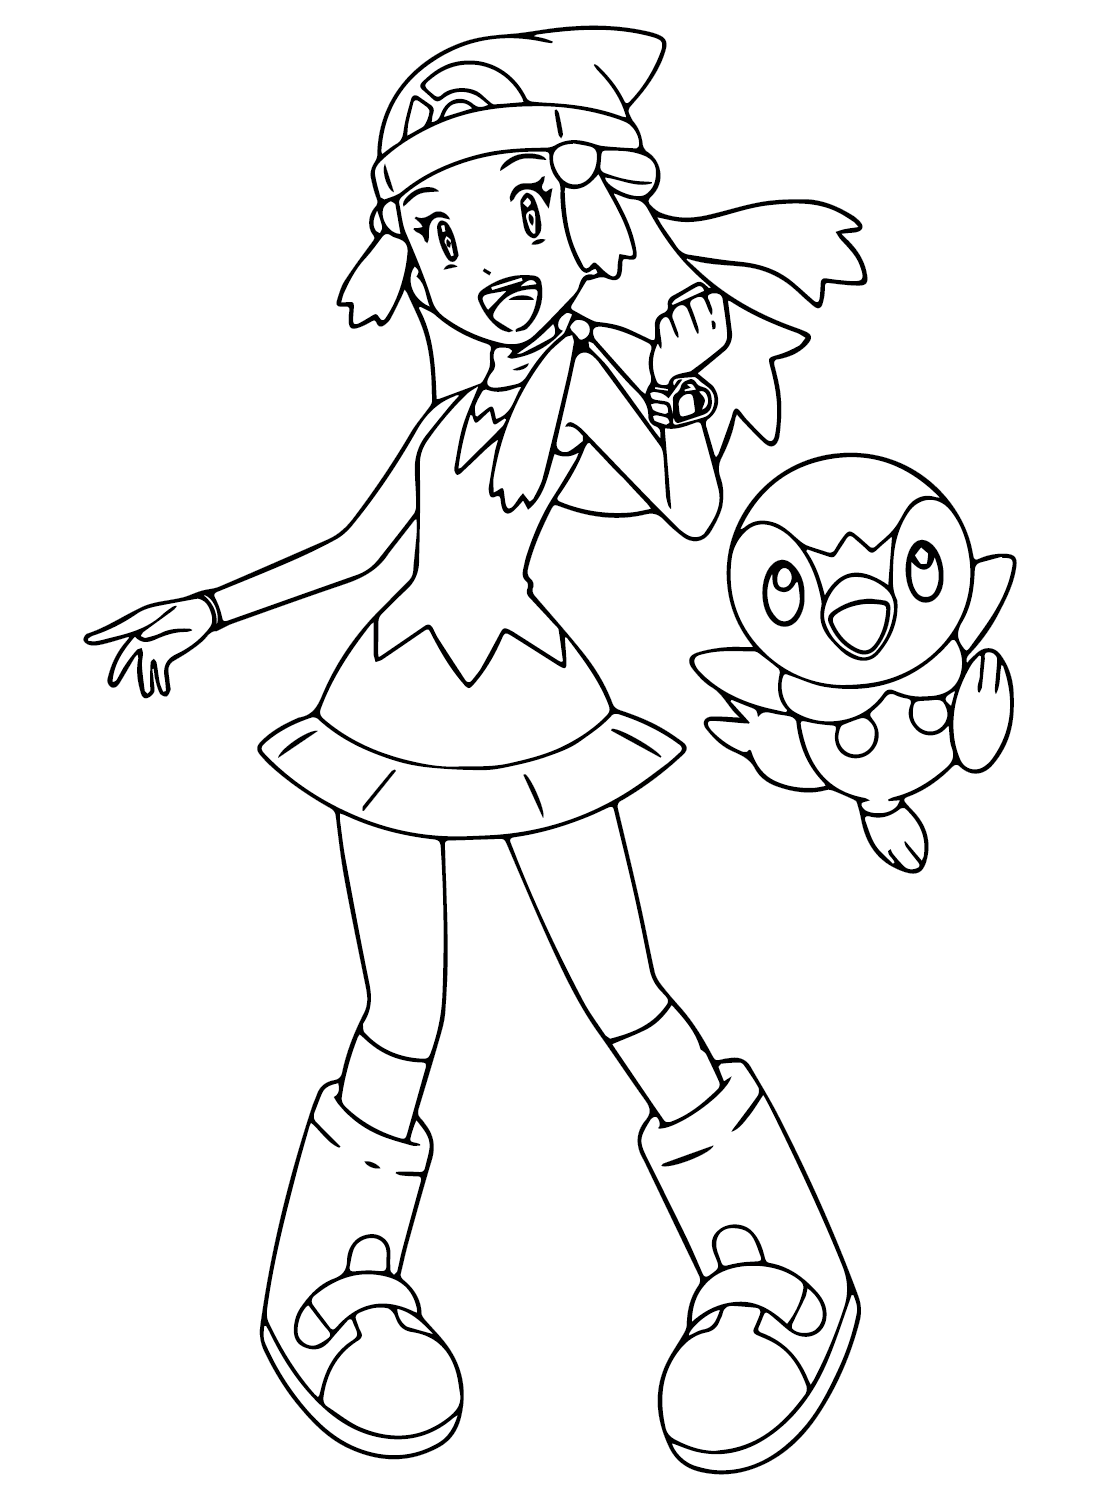 Dawn Pokemon Coloring Sheet - Free Printable Coloring Pages